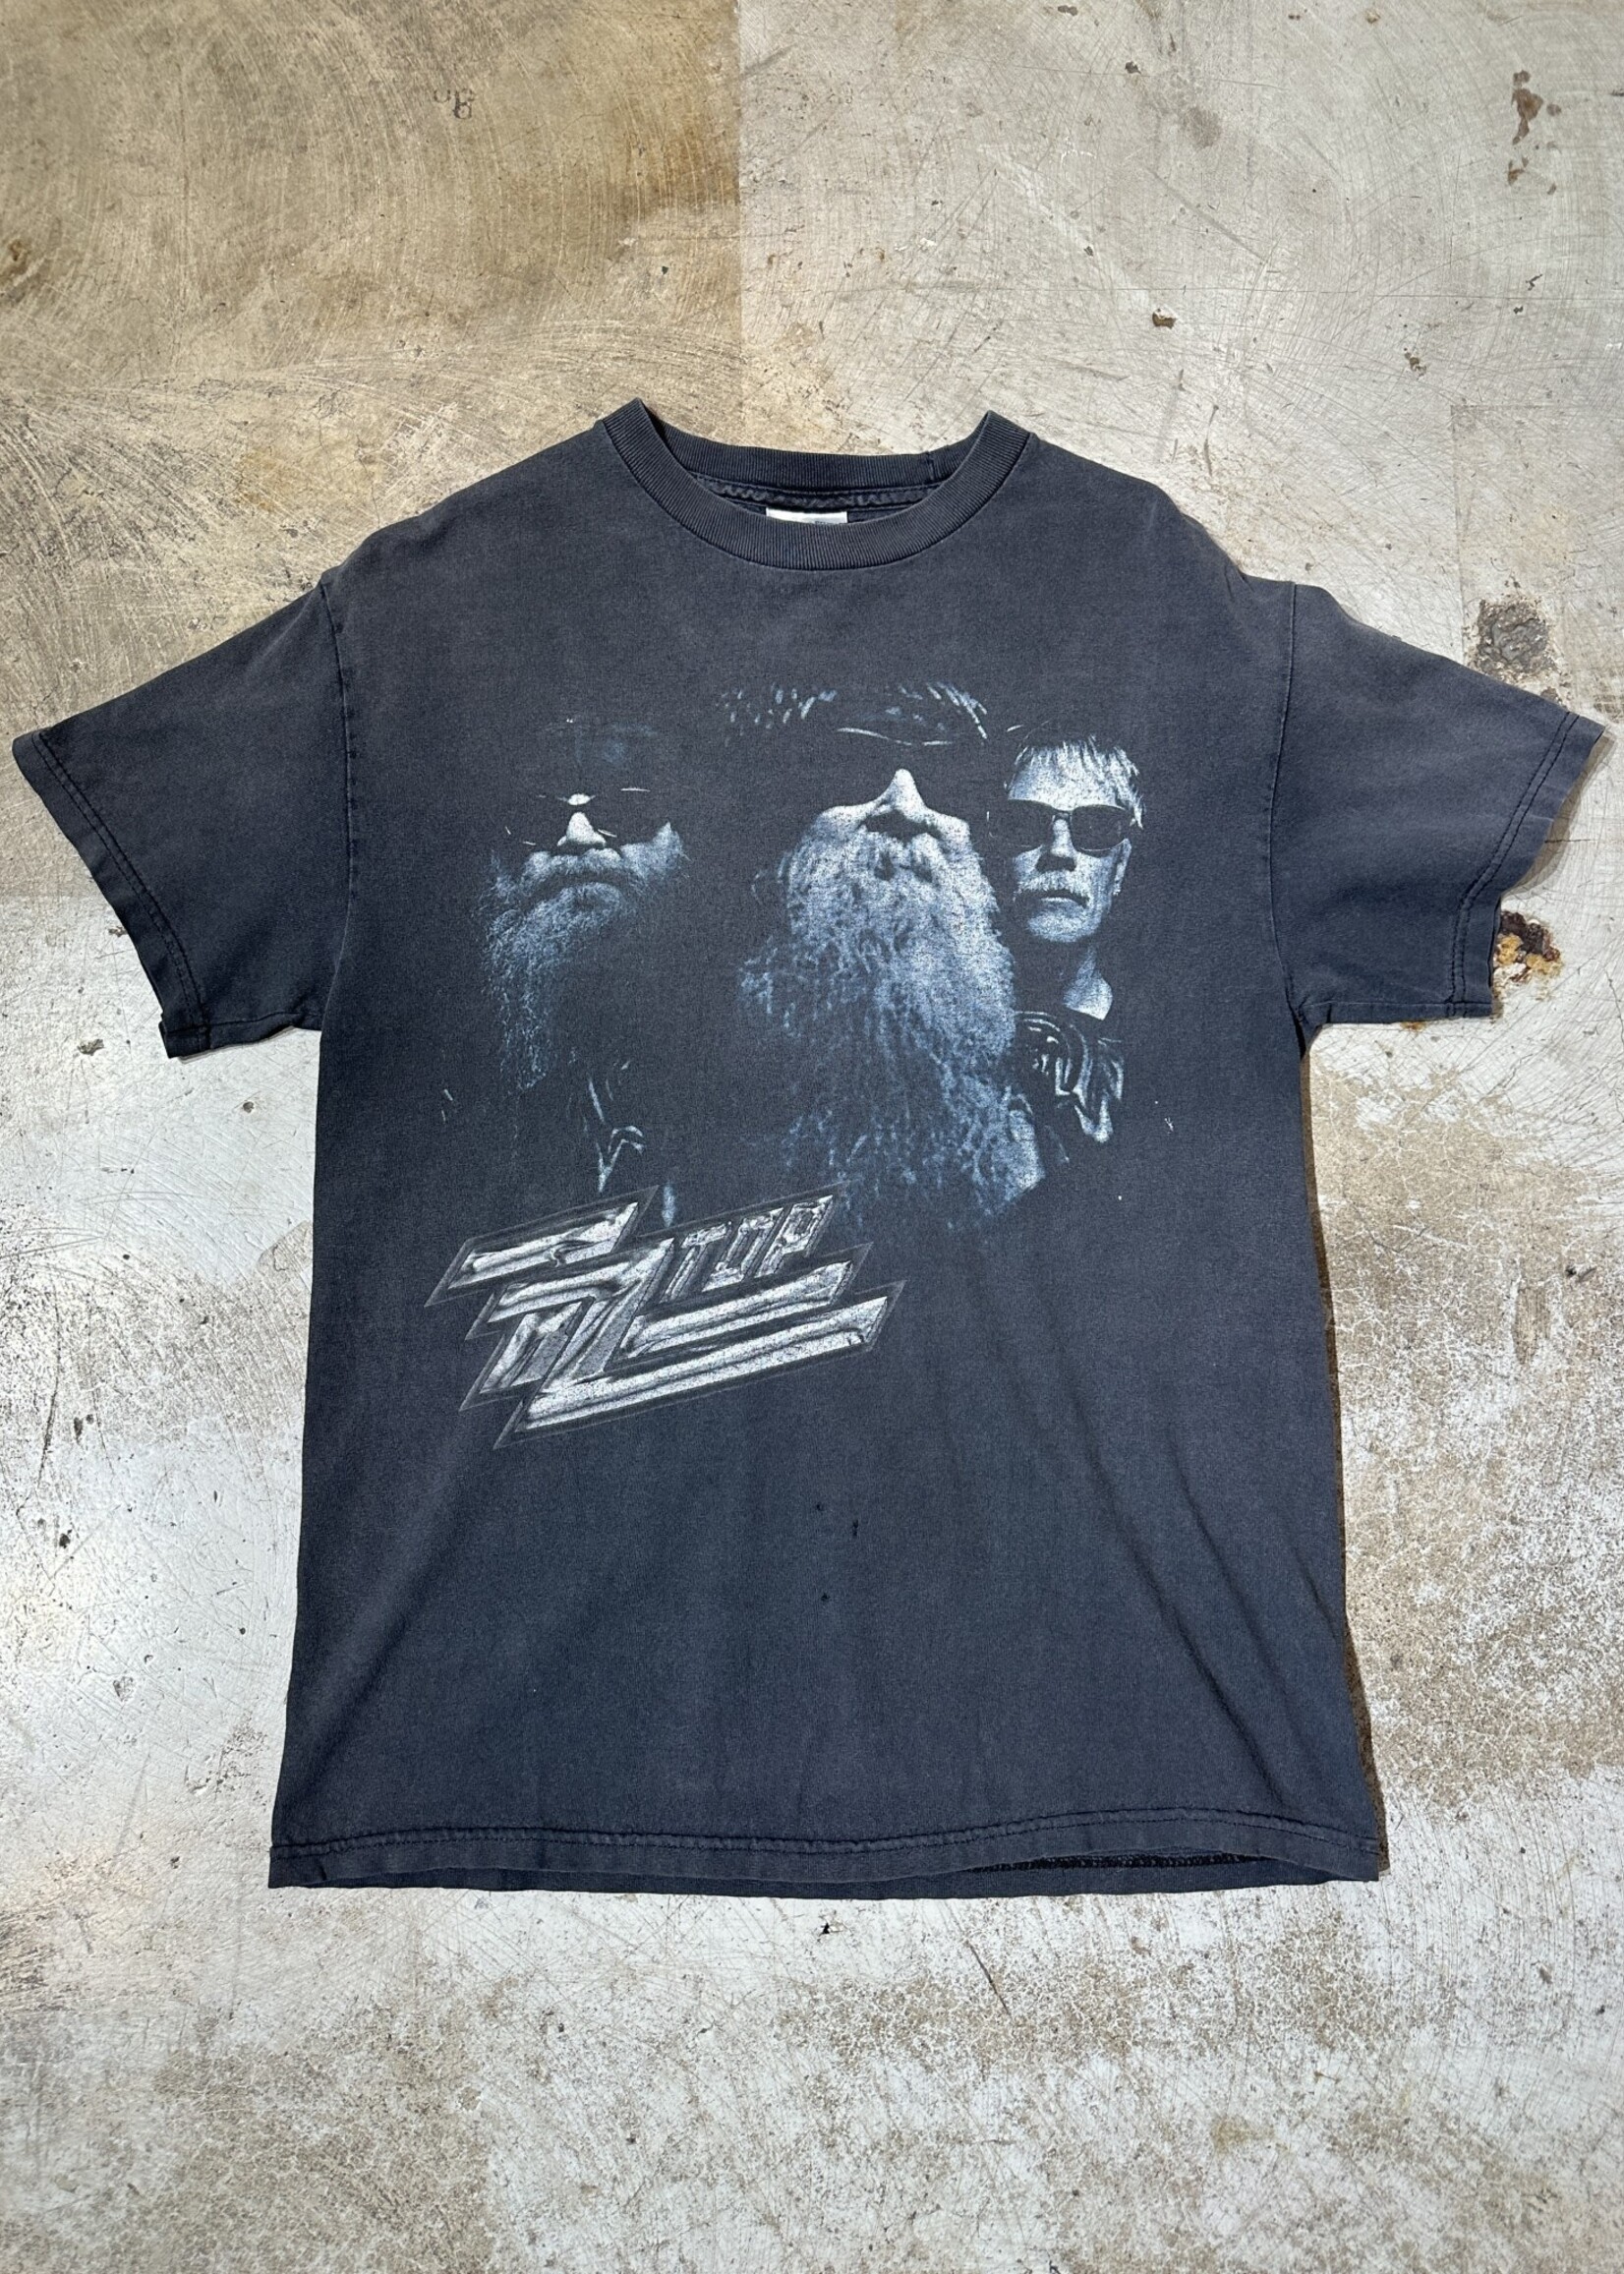 ZZ Top Faded Band Tee M